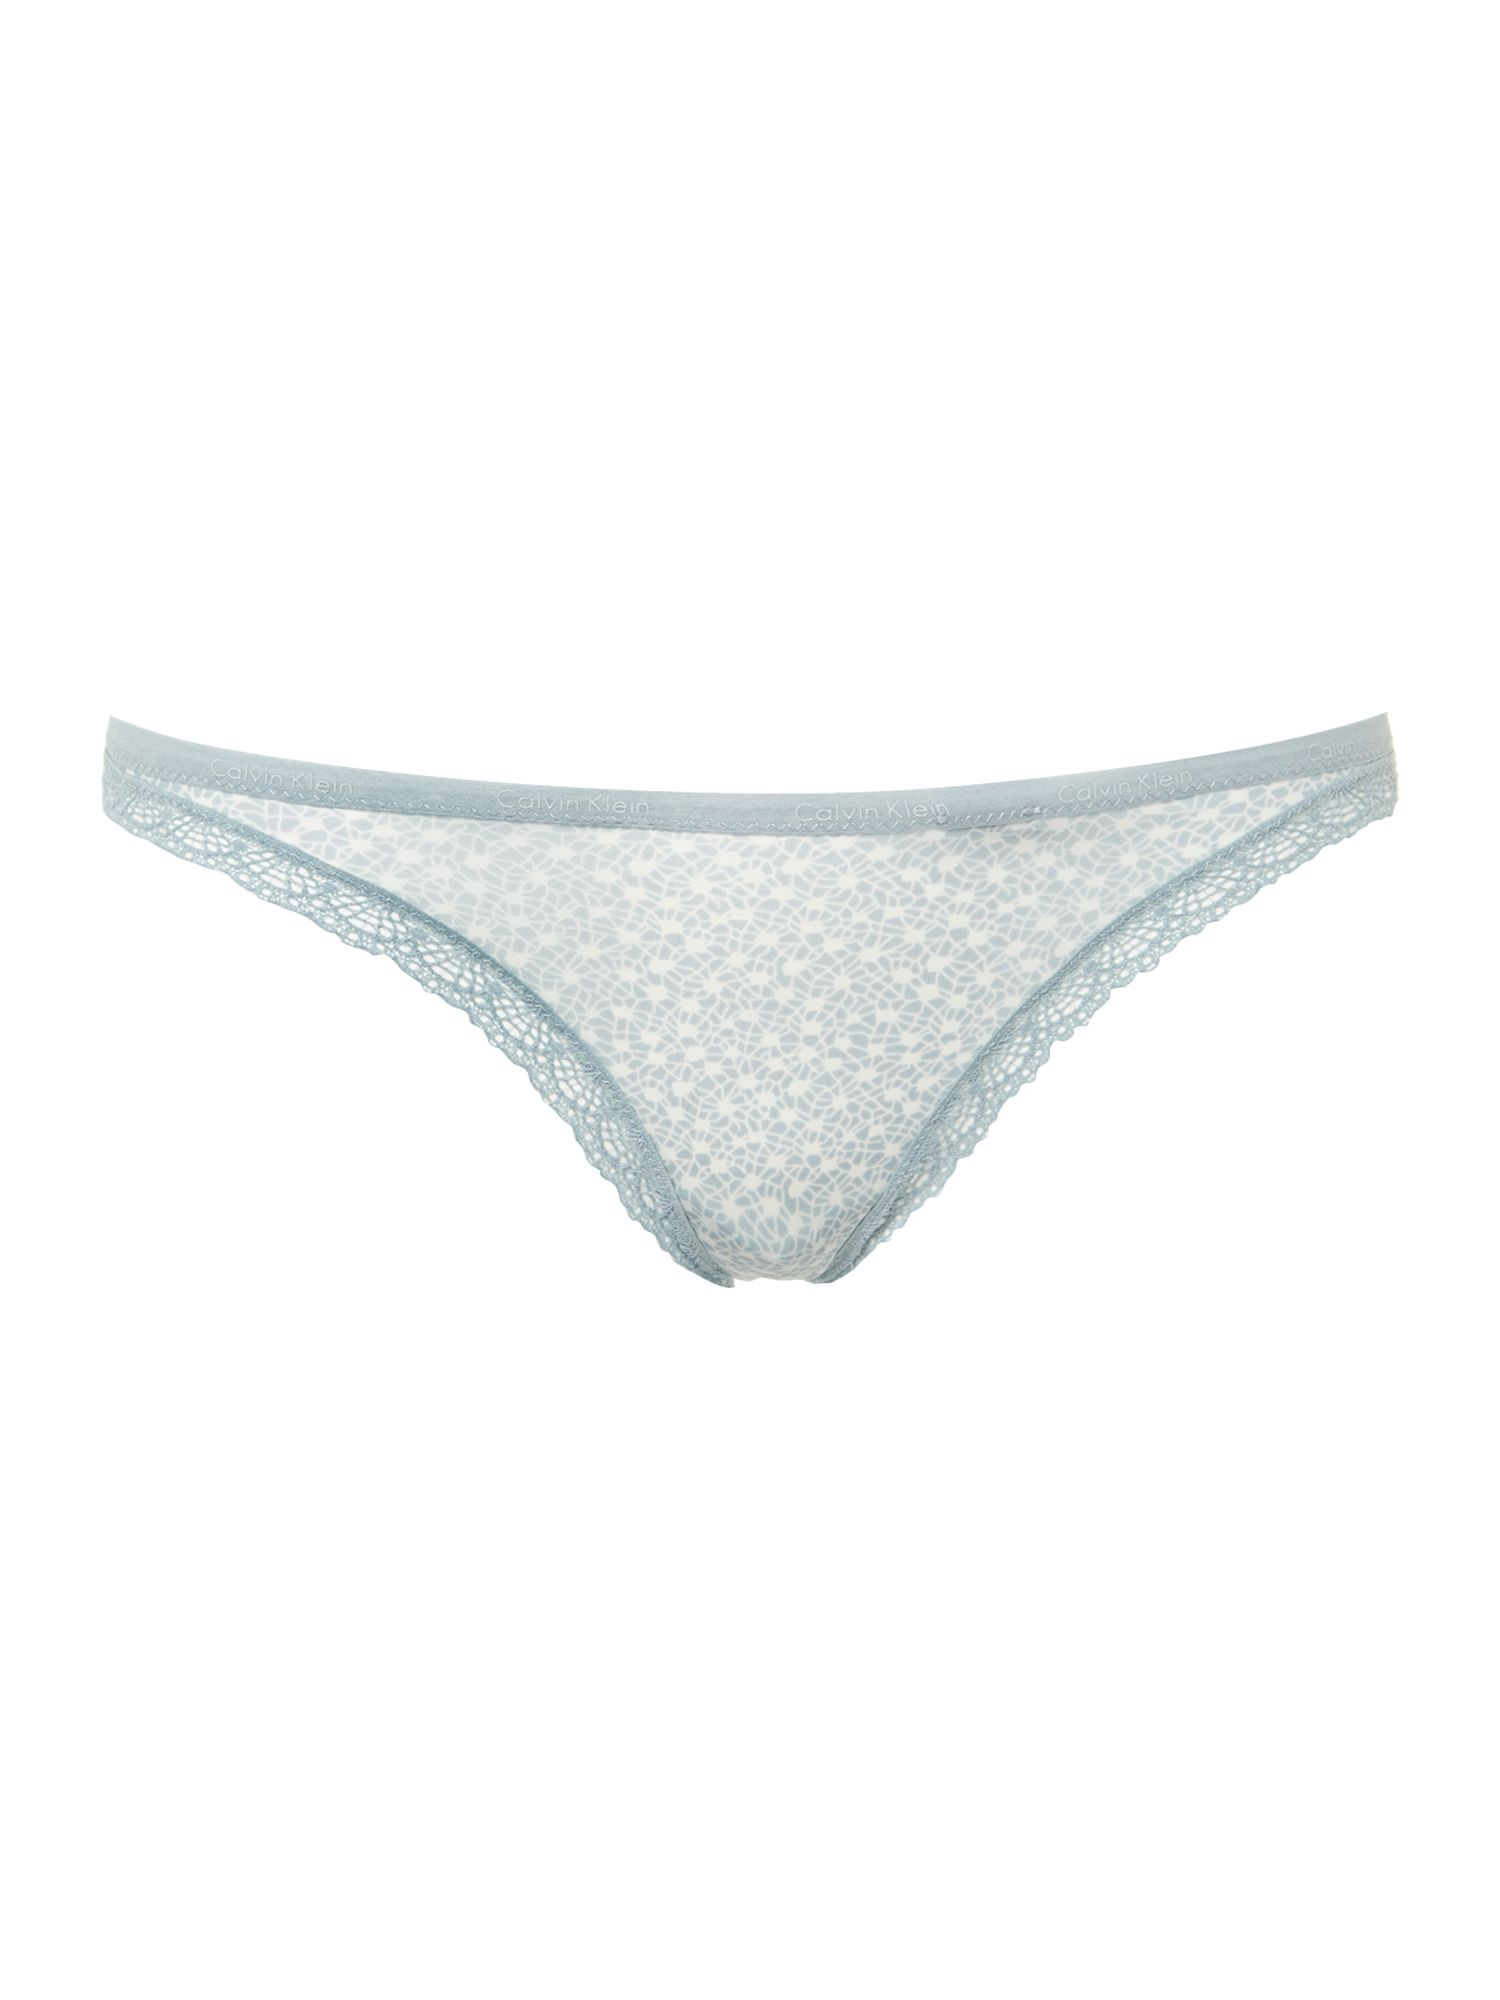 Calvin klein Bottoms Up Thong in Blue (Multi-Coloured) | Lyst